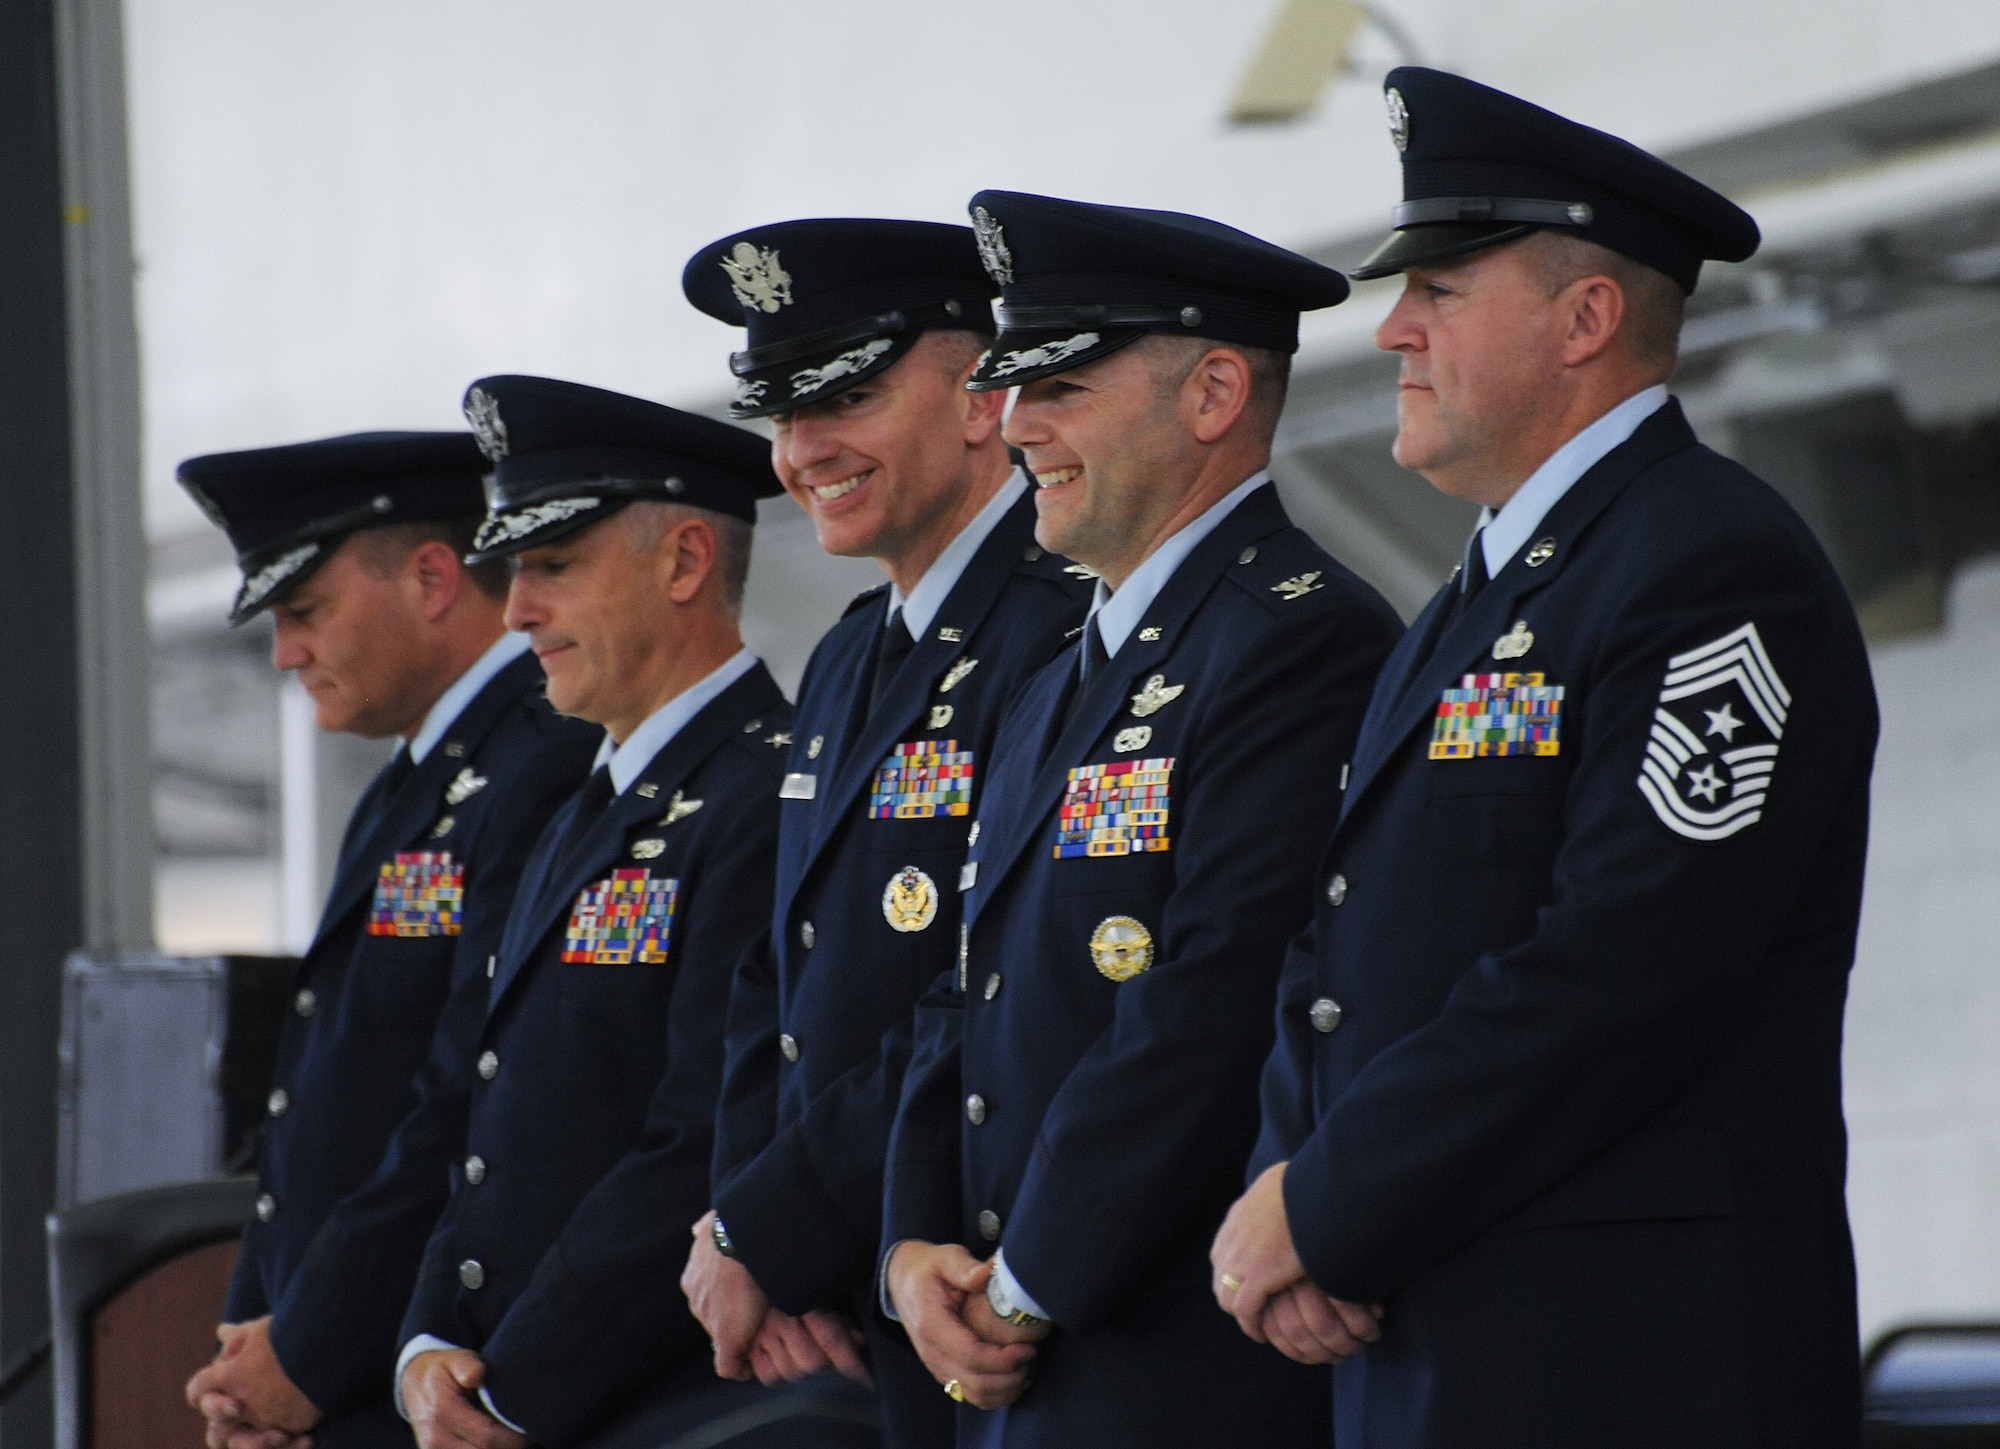 Members of the Oregon Air National Guard Change of Command Party enjoy a lighter moment during the ceremony as Col. Paul T. Fitzgerald, (center) hands the command to Col. Duke A. Pirak, (fourth from left), Portland Air National Guard Base, Ore., Nov. 6, 2016. (U.S. Air National Guard photo by Tech. Sgt. John Hughel, 142nd Fighter Wing Public Affairs).